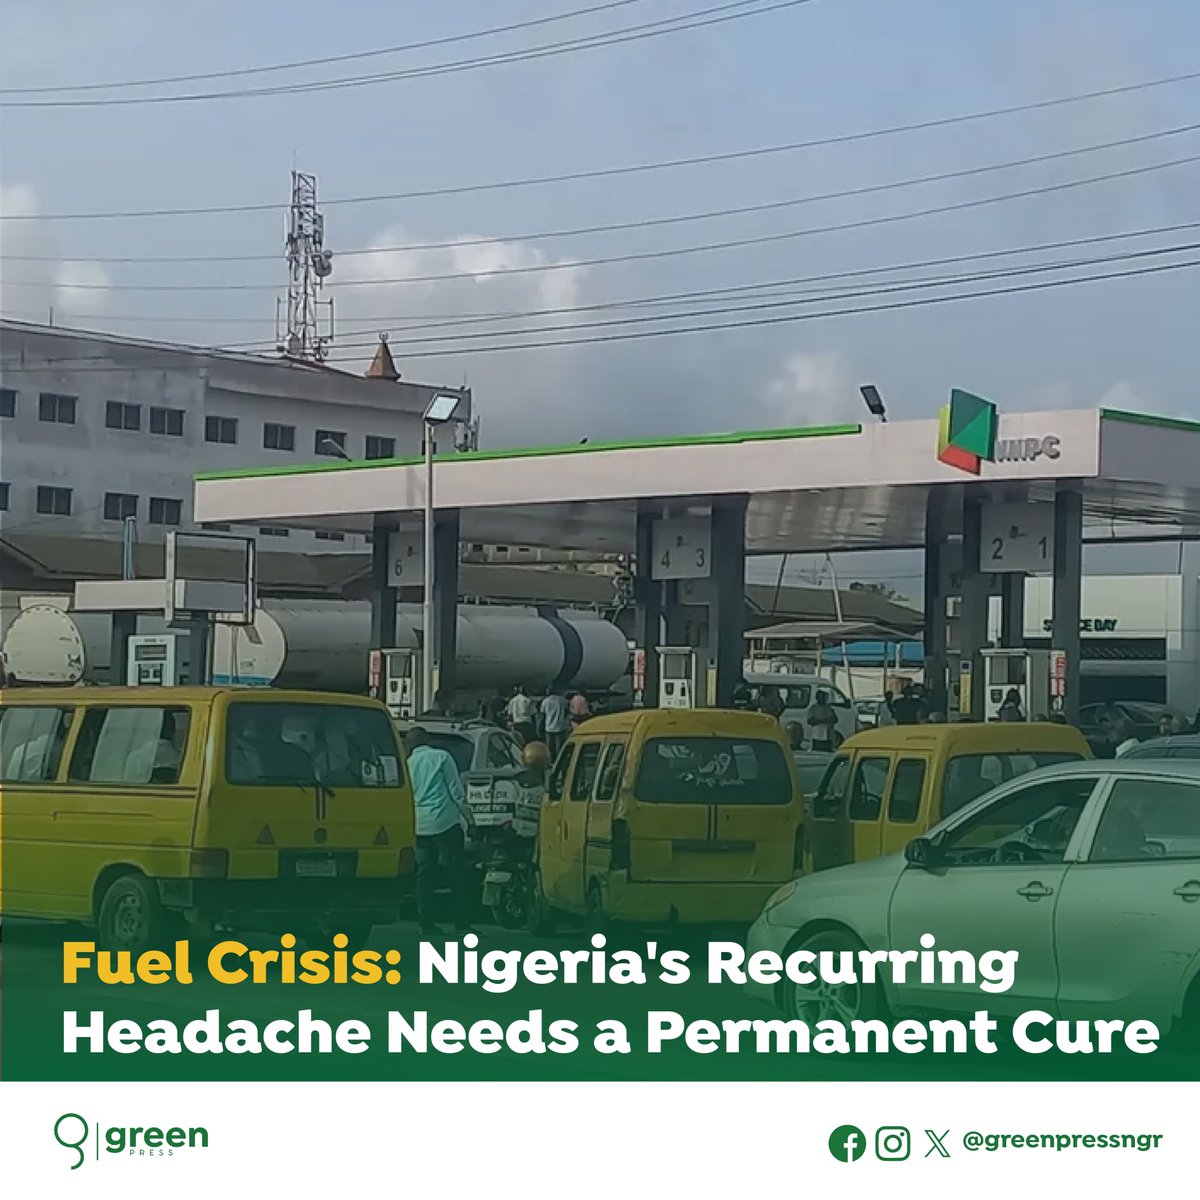 Fuel Crisis: Nigeria's Recurring Headache Needs a Permanent Cure Just when many Nigerians thought they had seen the last of it, the familiar scenes of long queues, frustrated motorists and the economic hardship that comes with every cycle of fuel crisis is back and biting hard…